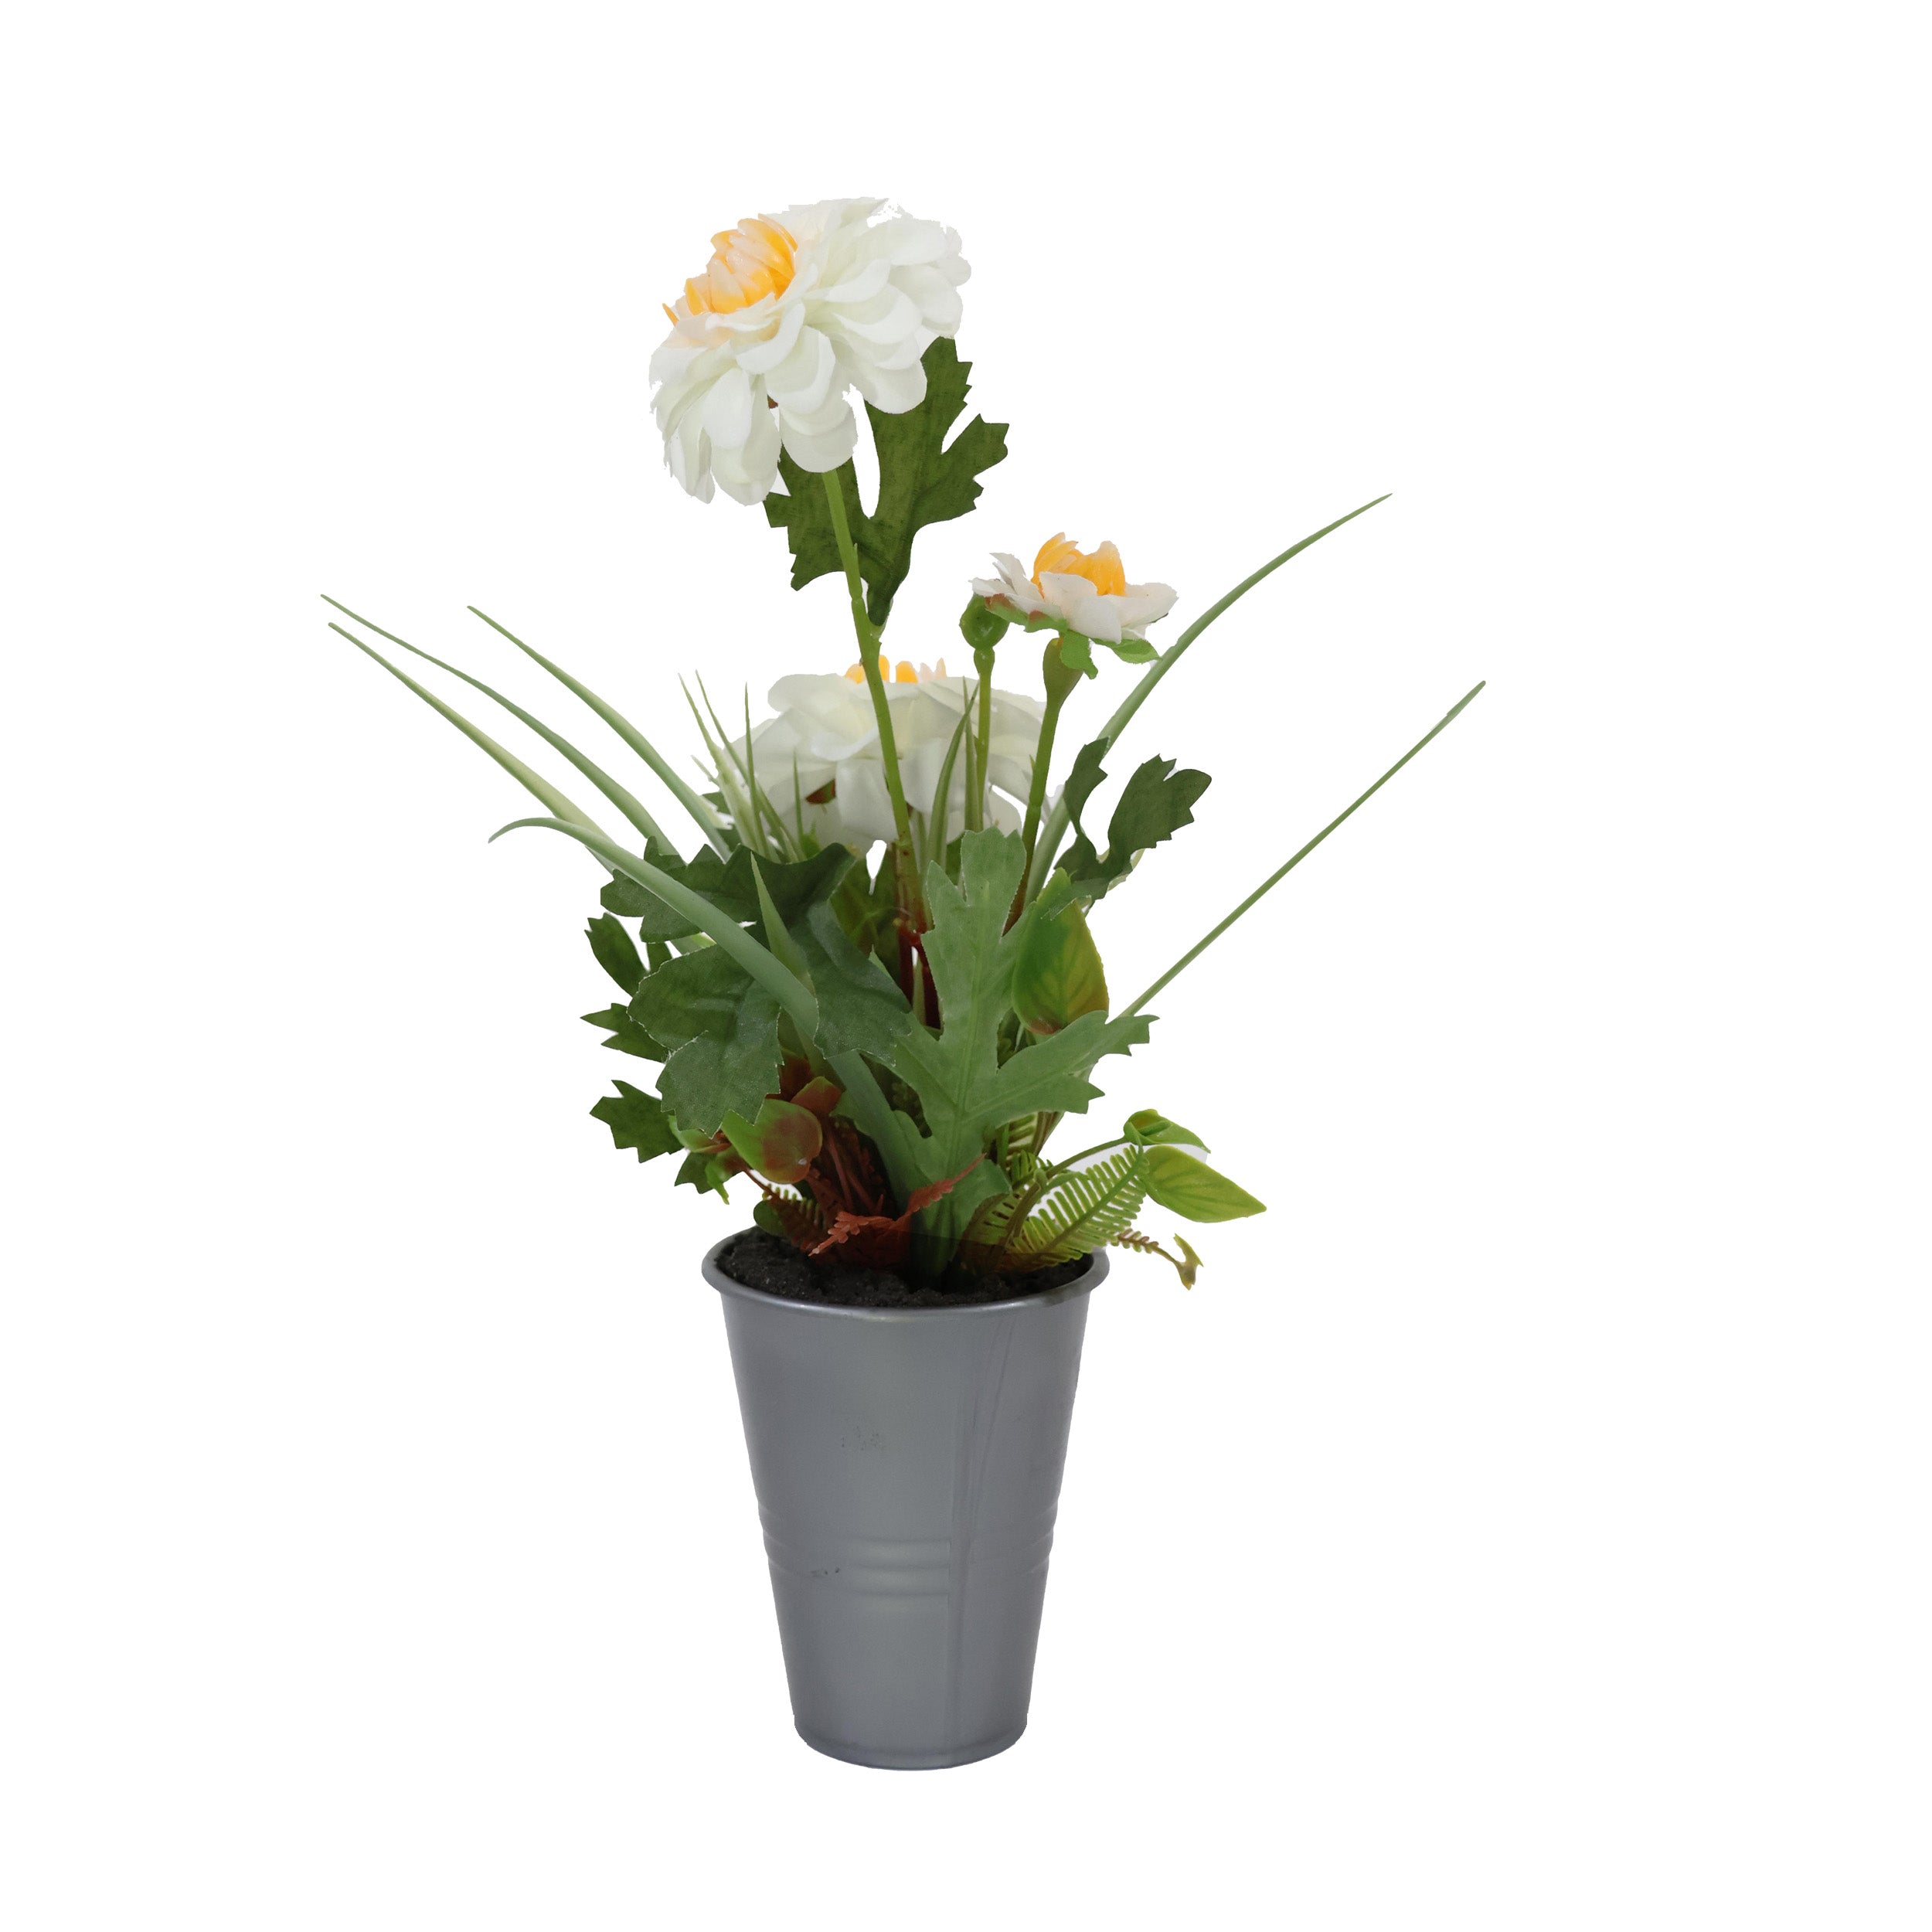 Aavana greens Artificial Bonsai Plant,  Artificial Flowers Plant, Artificial Decorative Plant Home Office Indoor and Outdoor Decoration